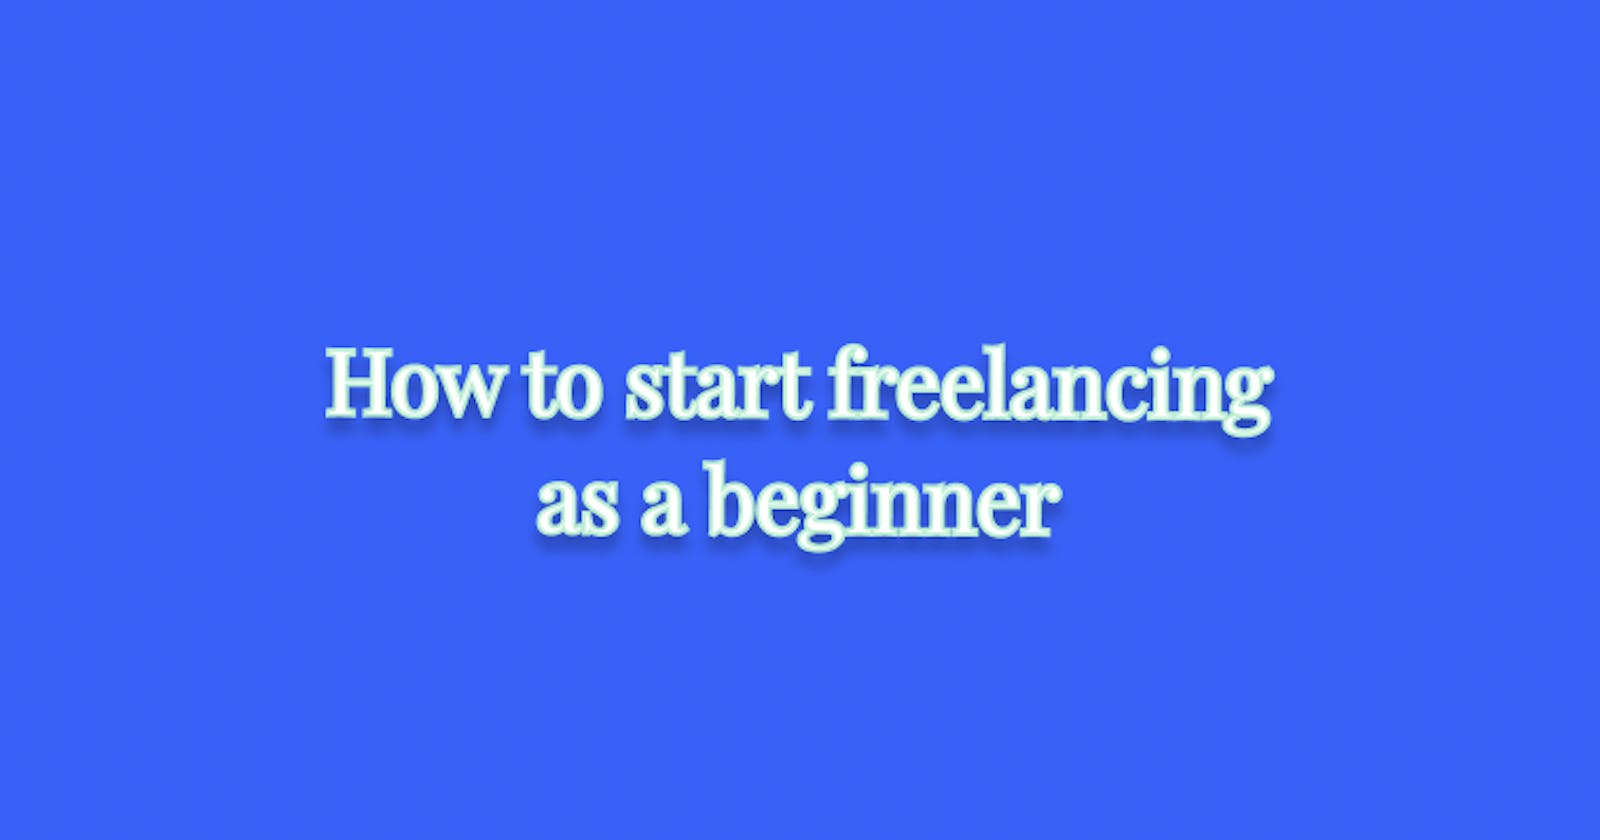 How to start freelancing as a beginner